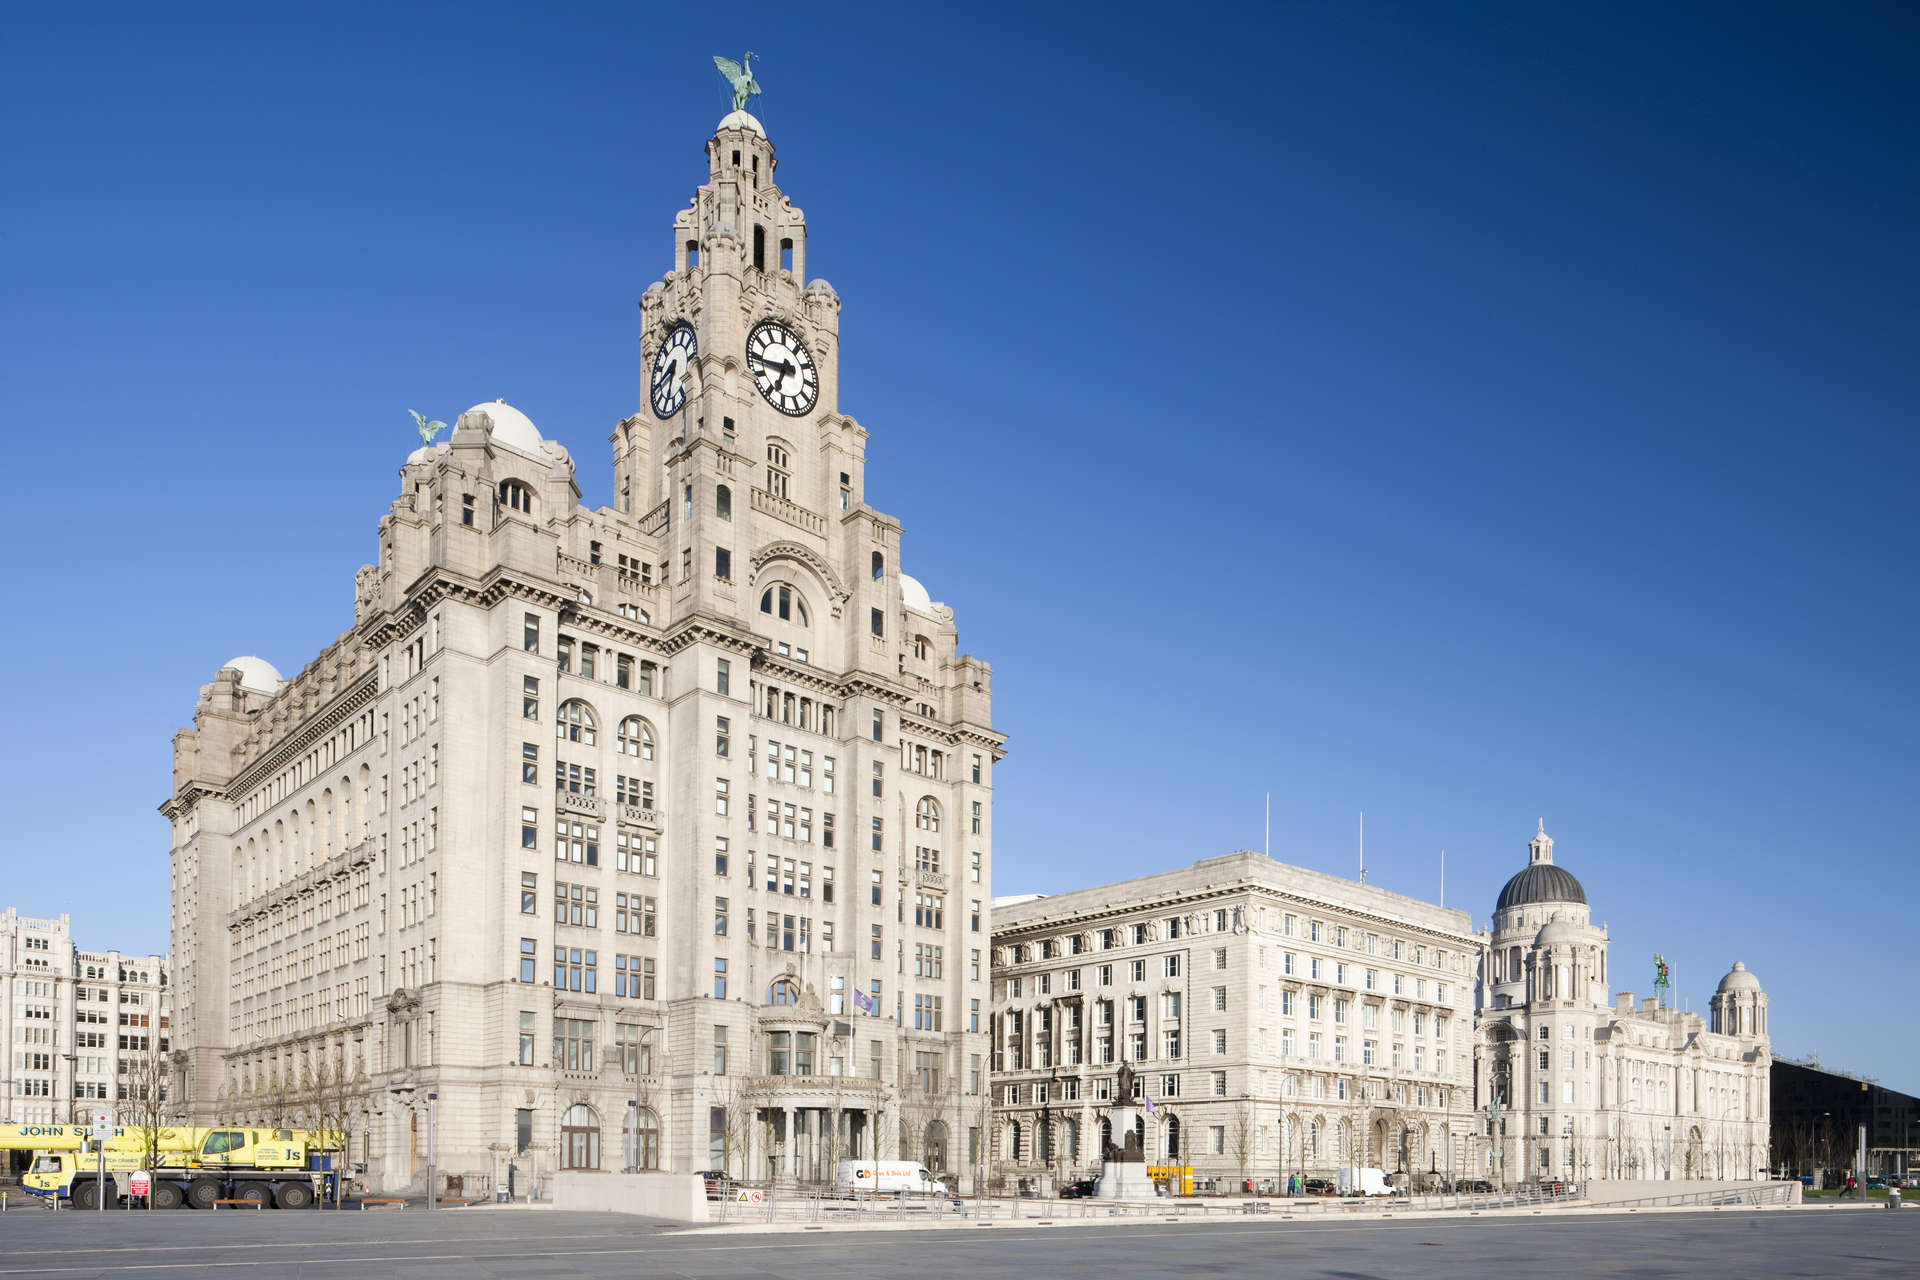 Port of Liverpool, Cunard Building and Liver Building Make Up 'The Three Graces', Merseyside